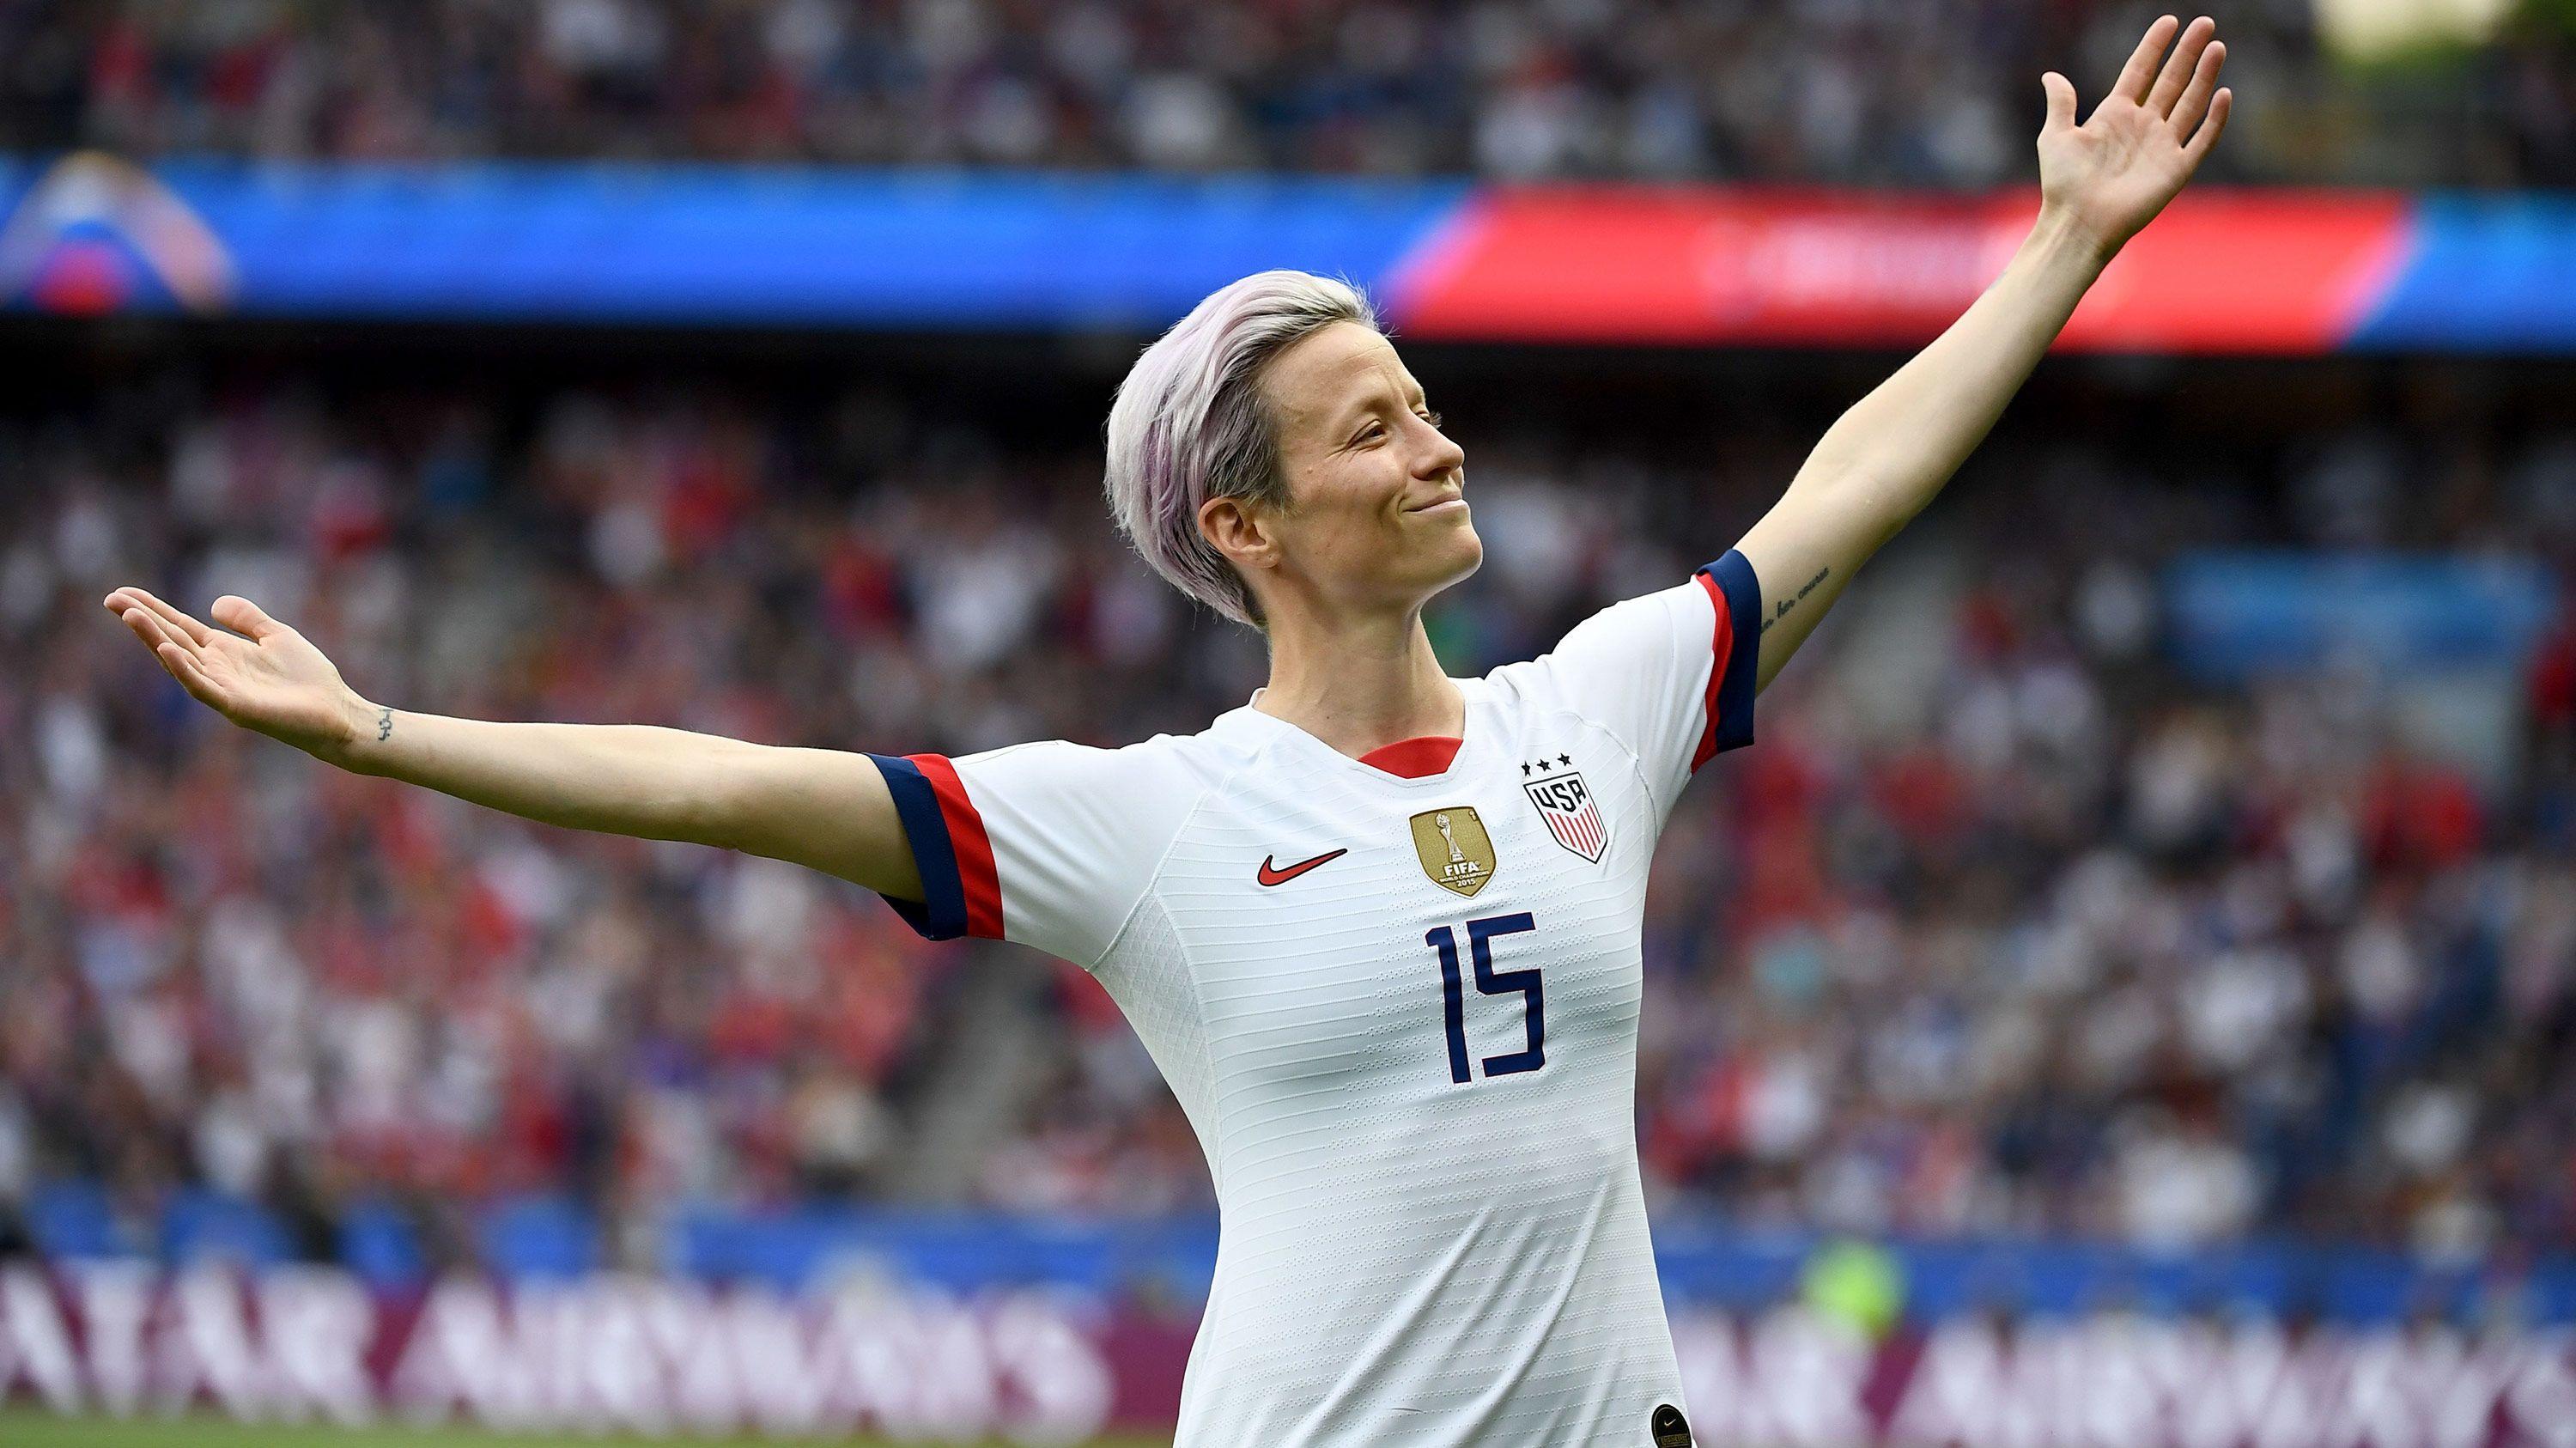 Megan Rapinoe We All Have A Responsibility To Make The World